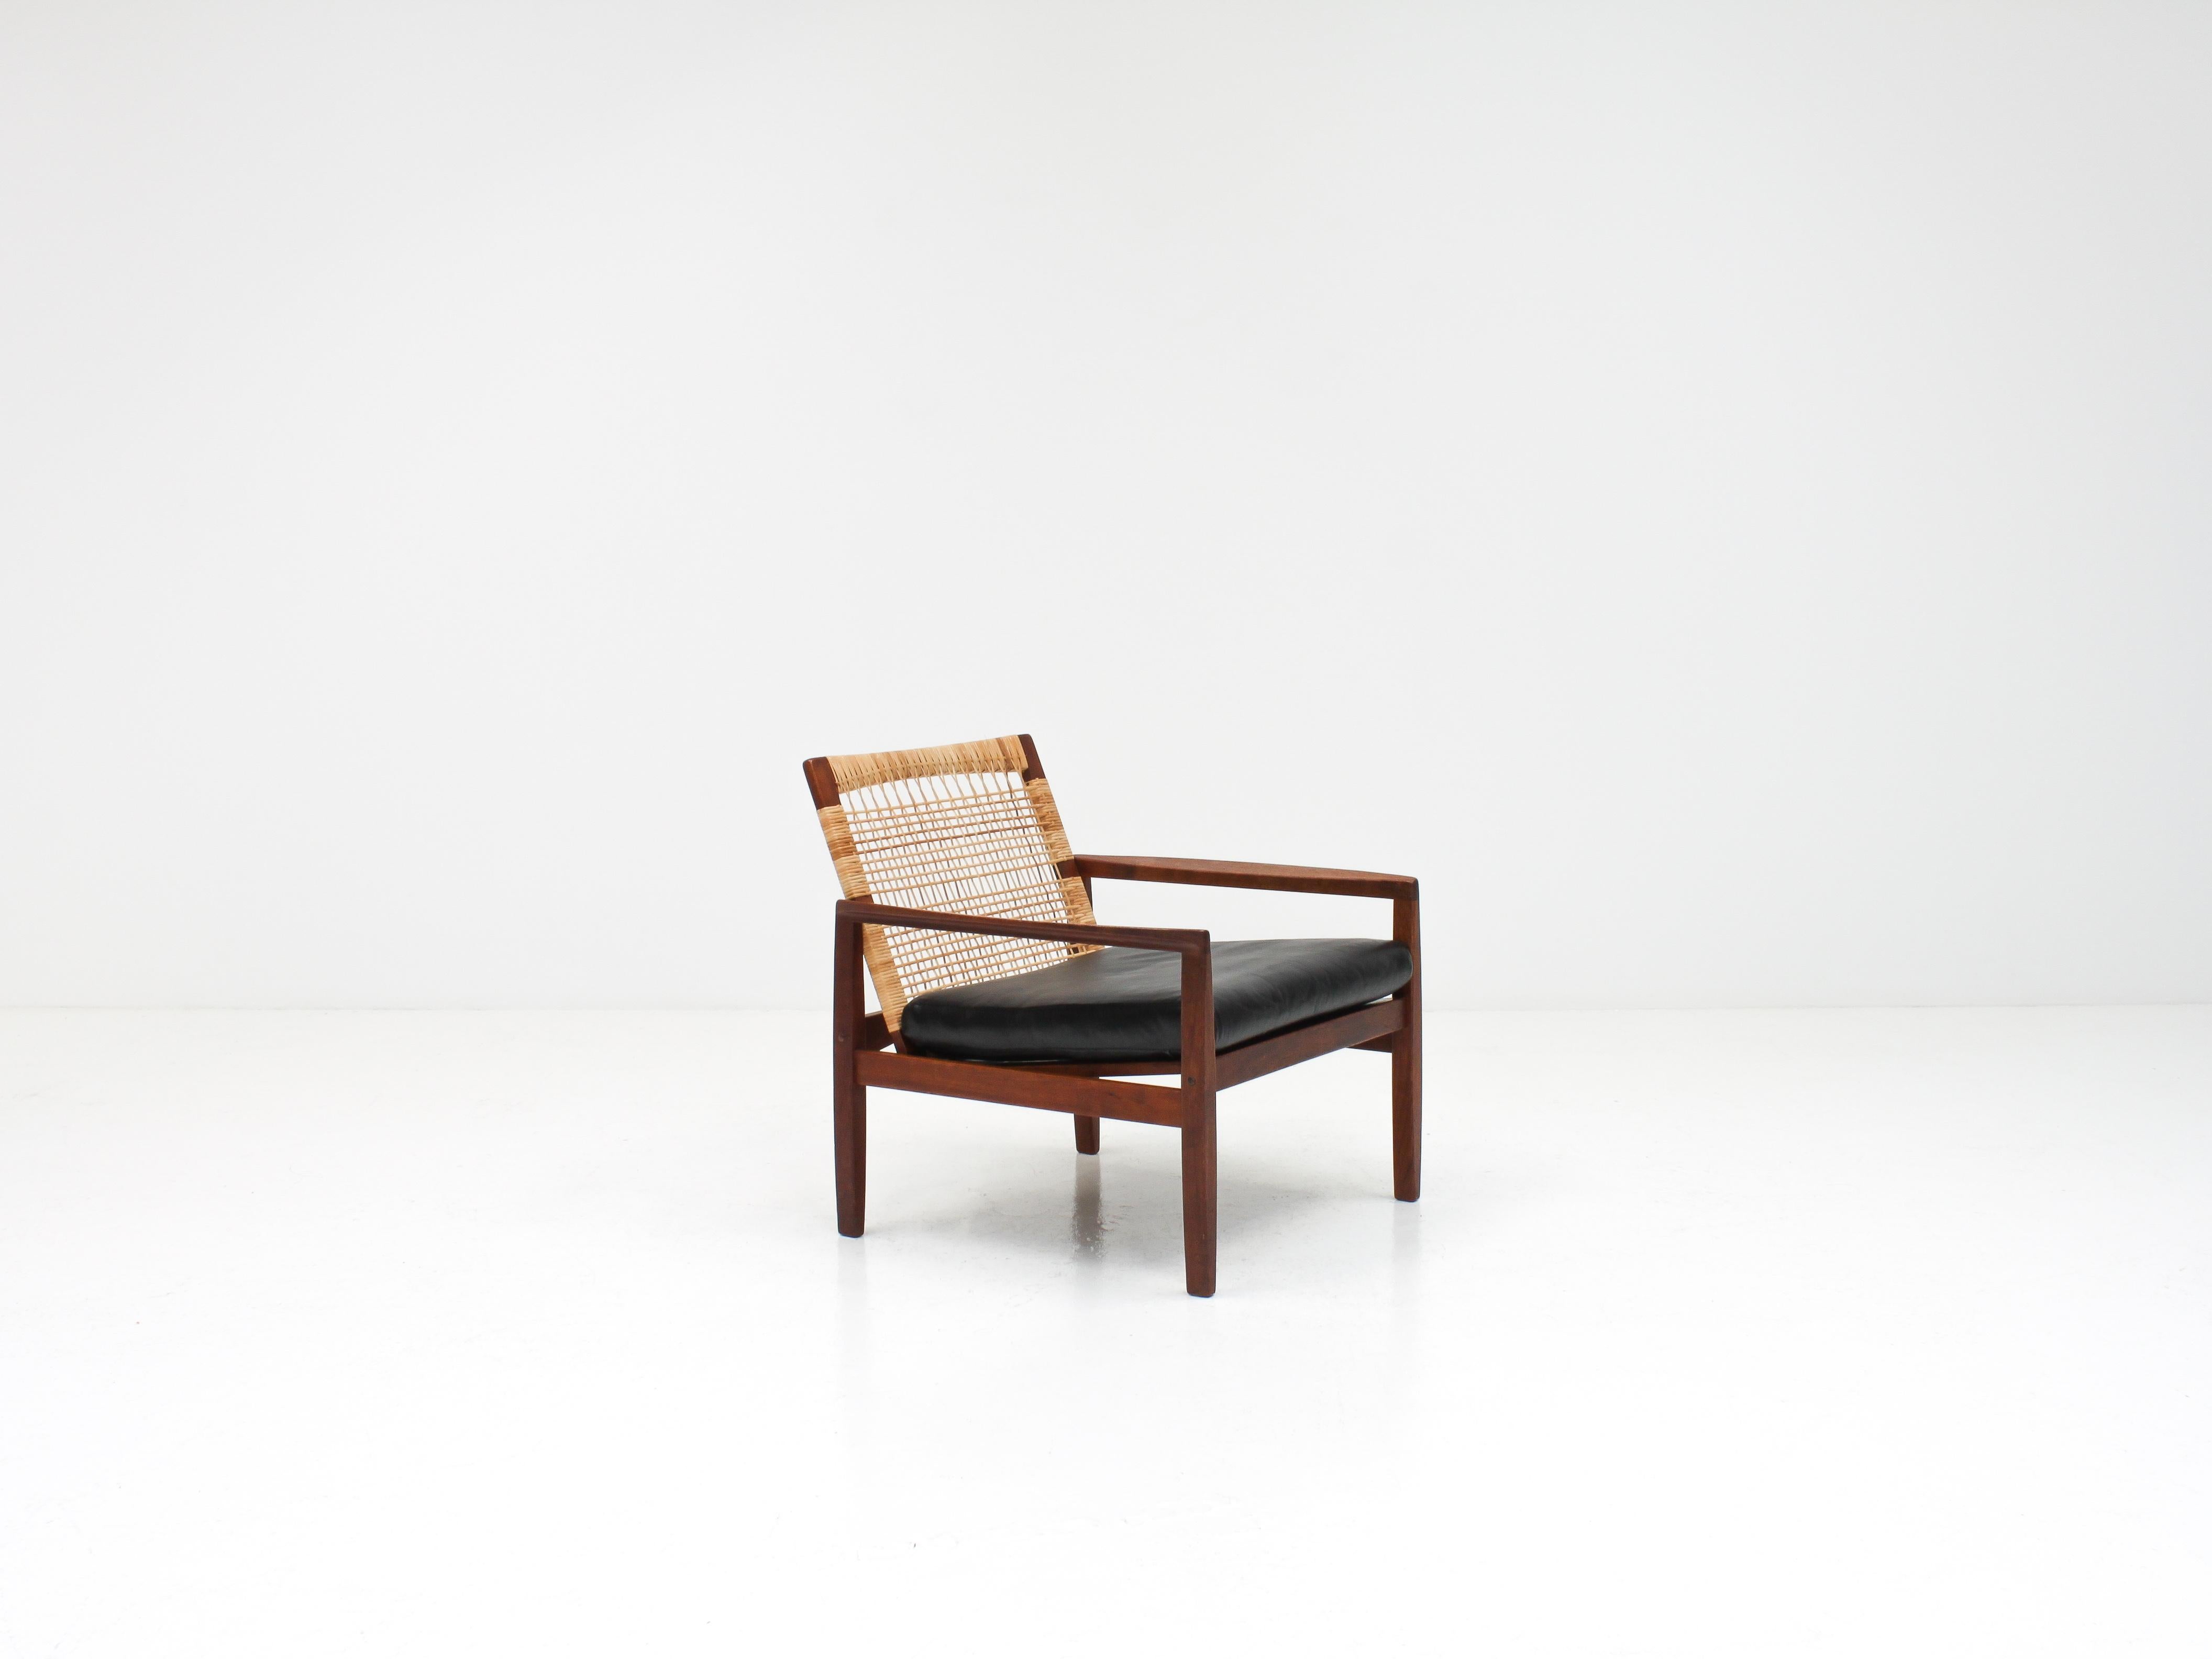 A Hans Olsen Model 519 easy chair, produced by Juul Kristensen, Denmark, in the late 1950s/early 1960s.

Featuring a 